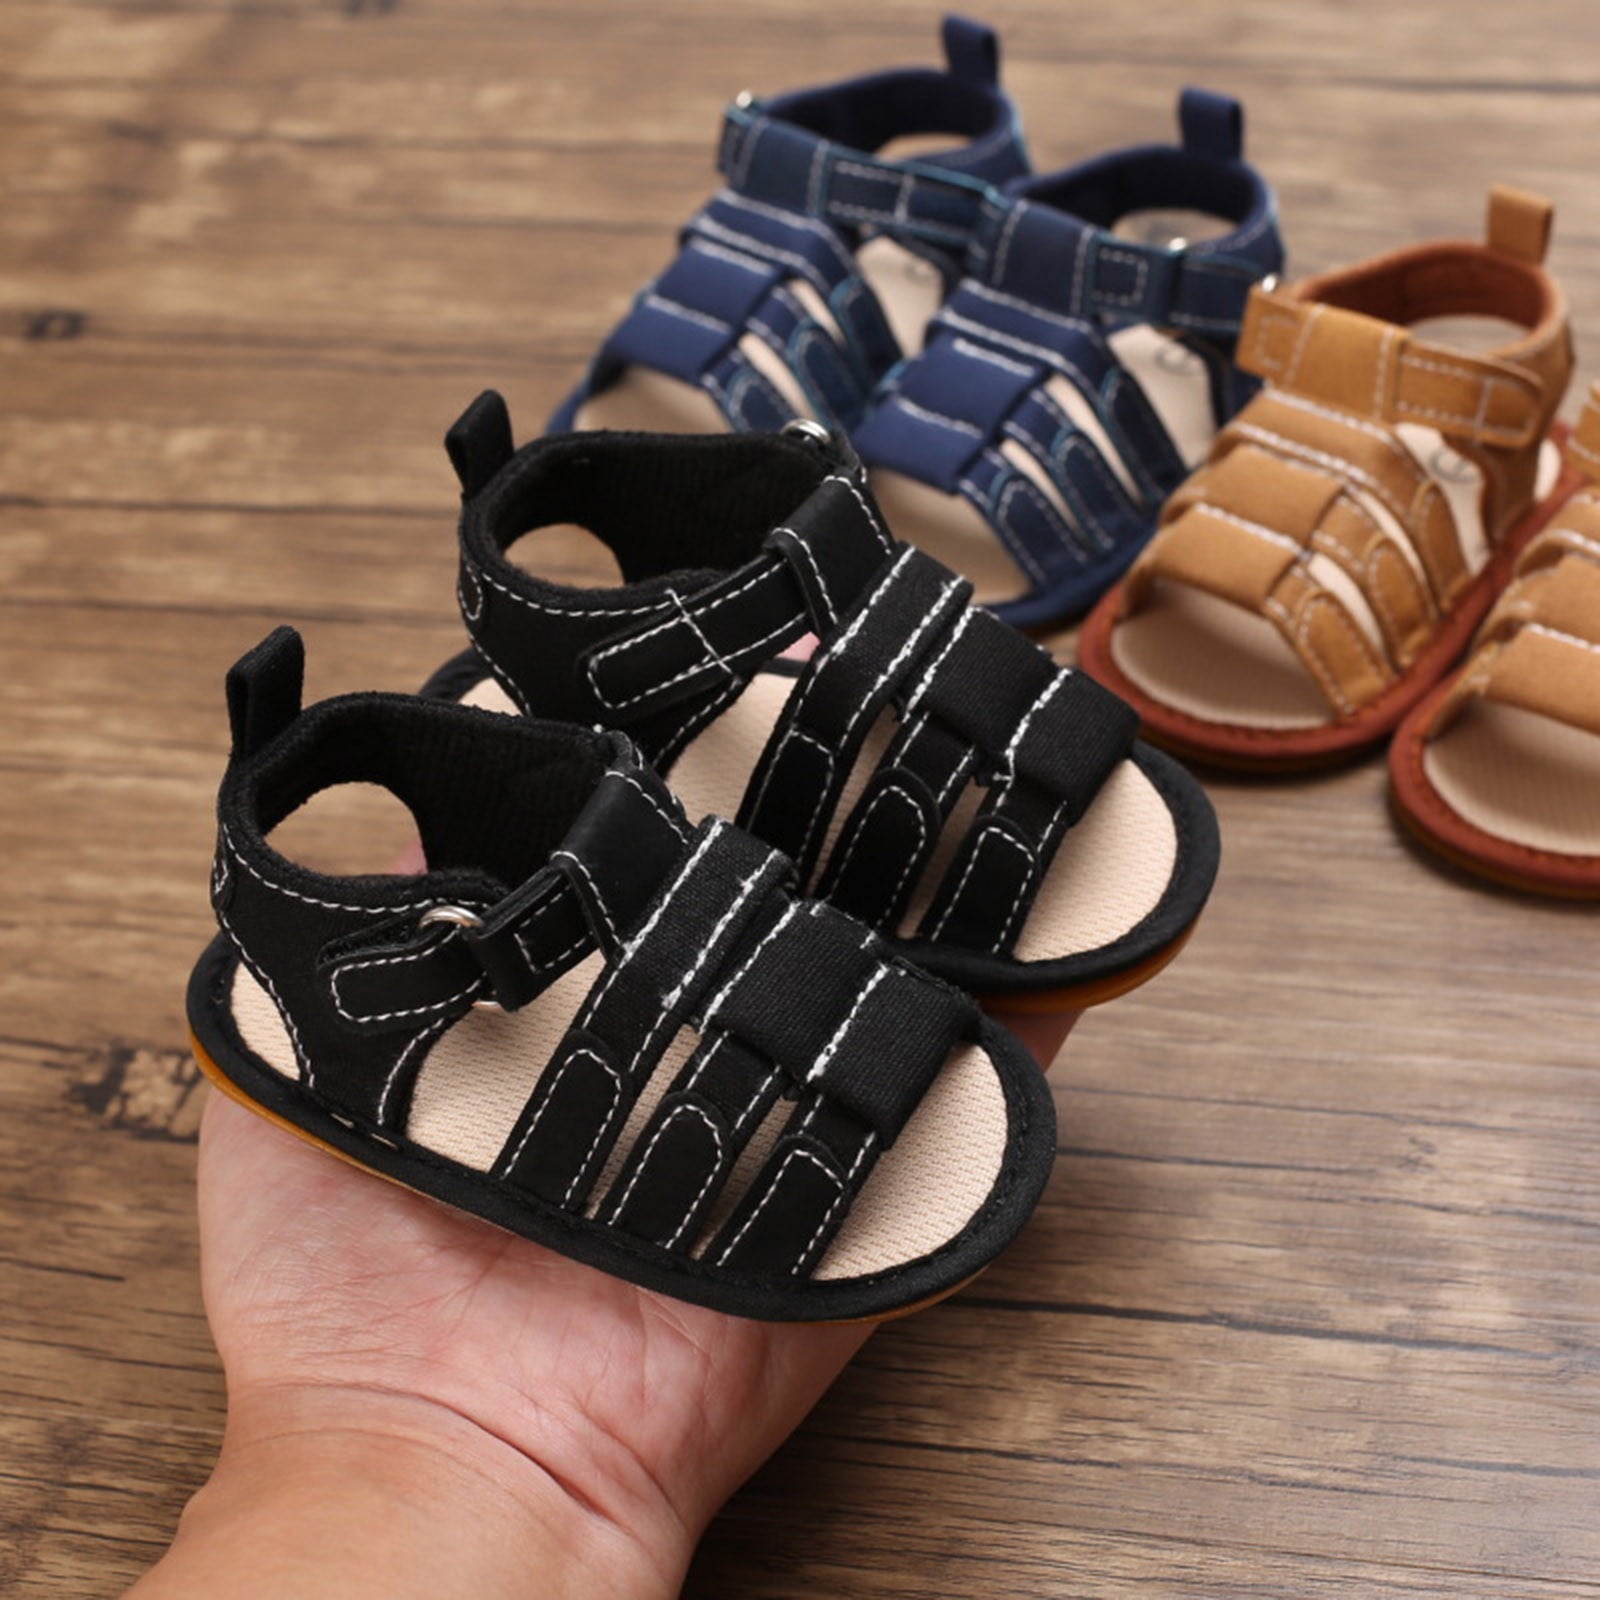 【HOT】 New Canvas PU Baby Non-Slip Sandals Child Summer Boys Fashion Sandals  Sneakers Infant Shoes 0-18 Month Baby Shoes